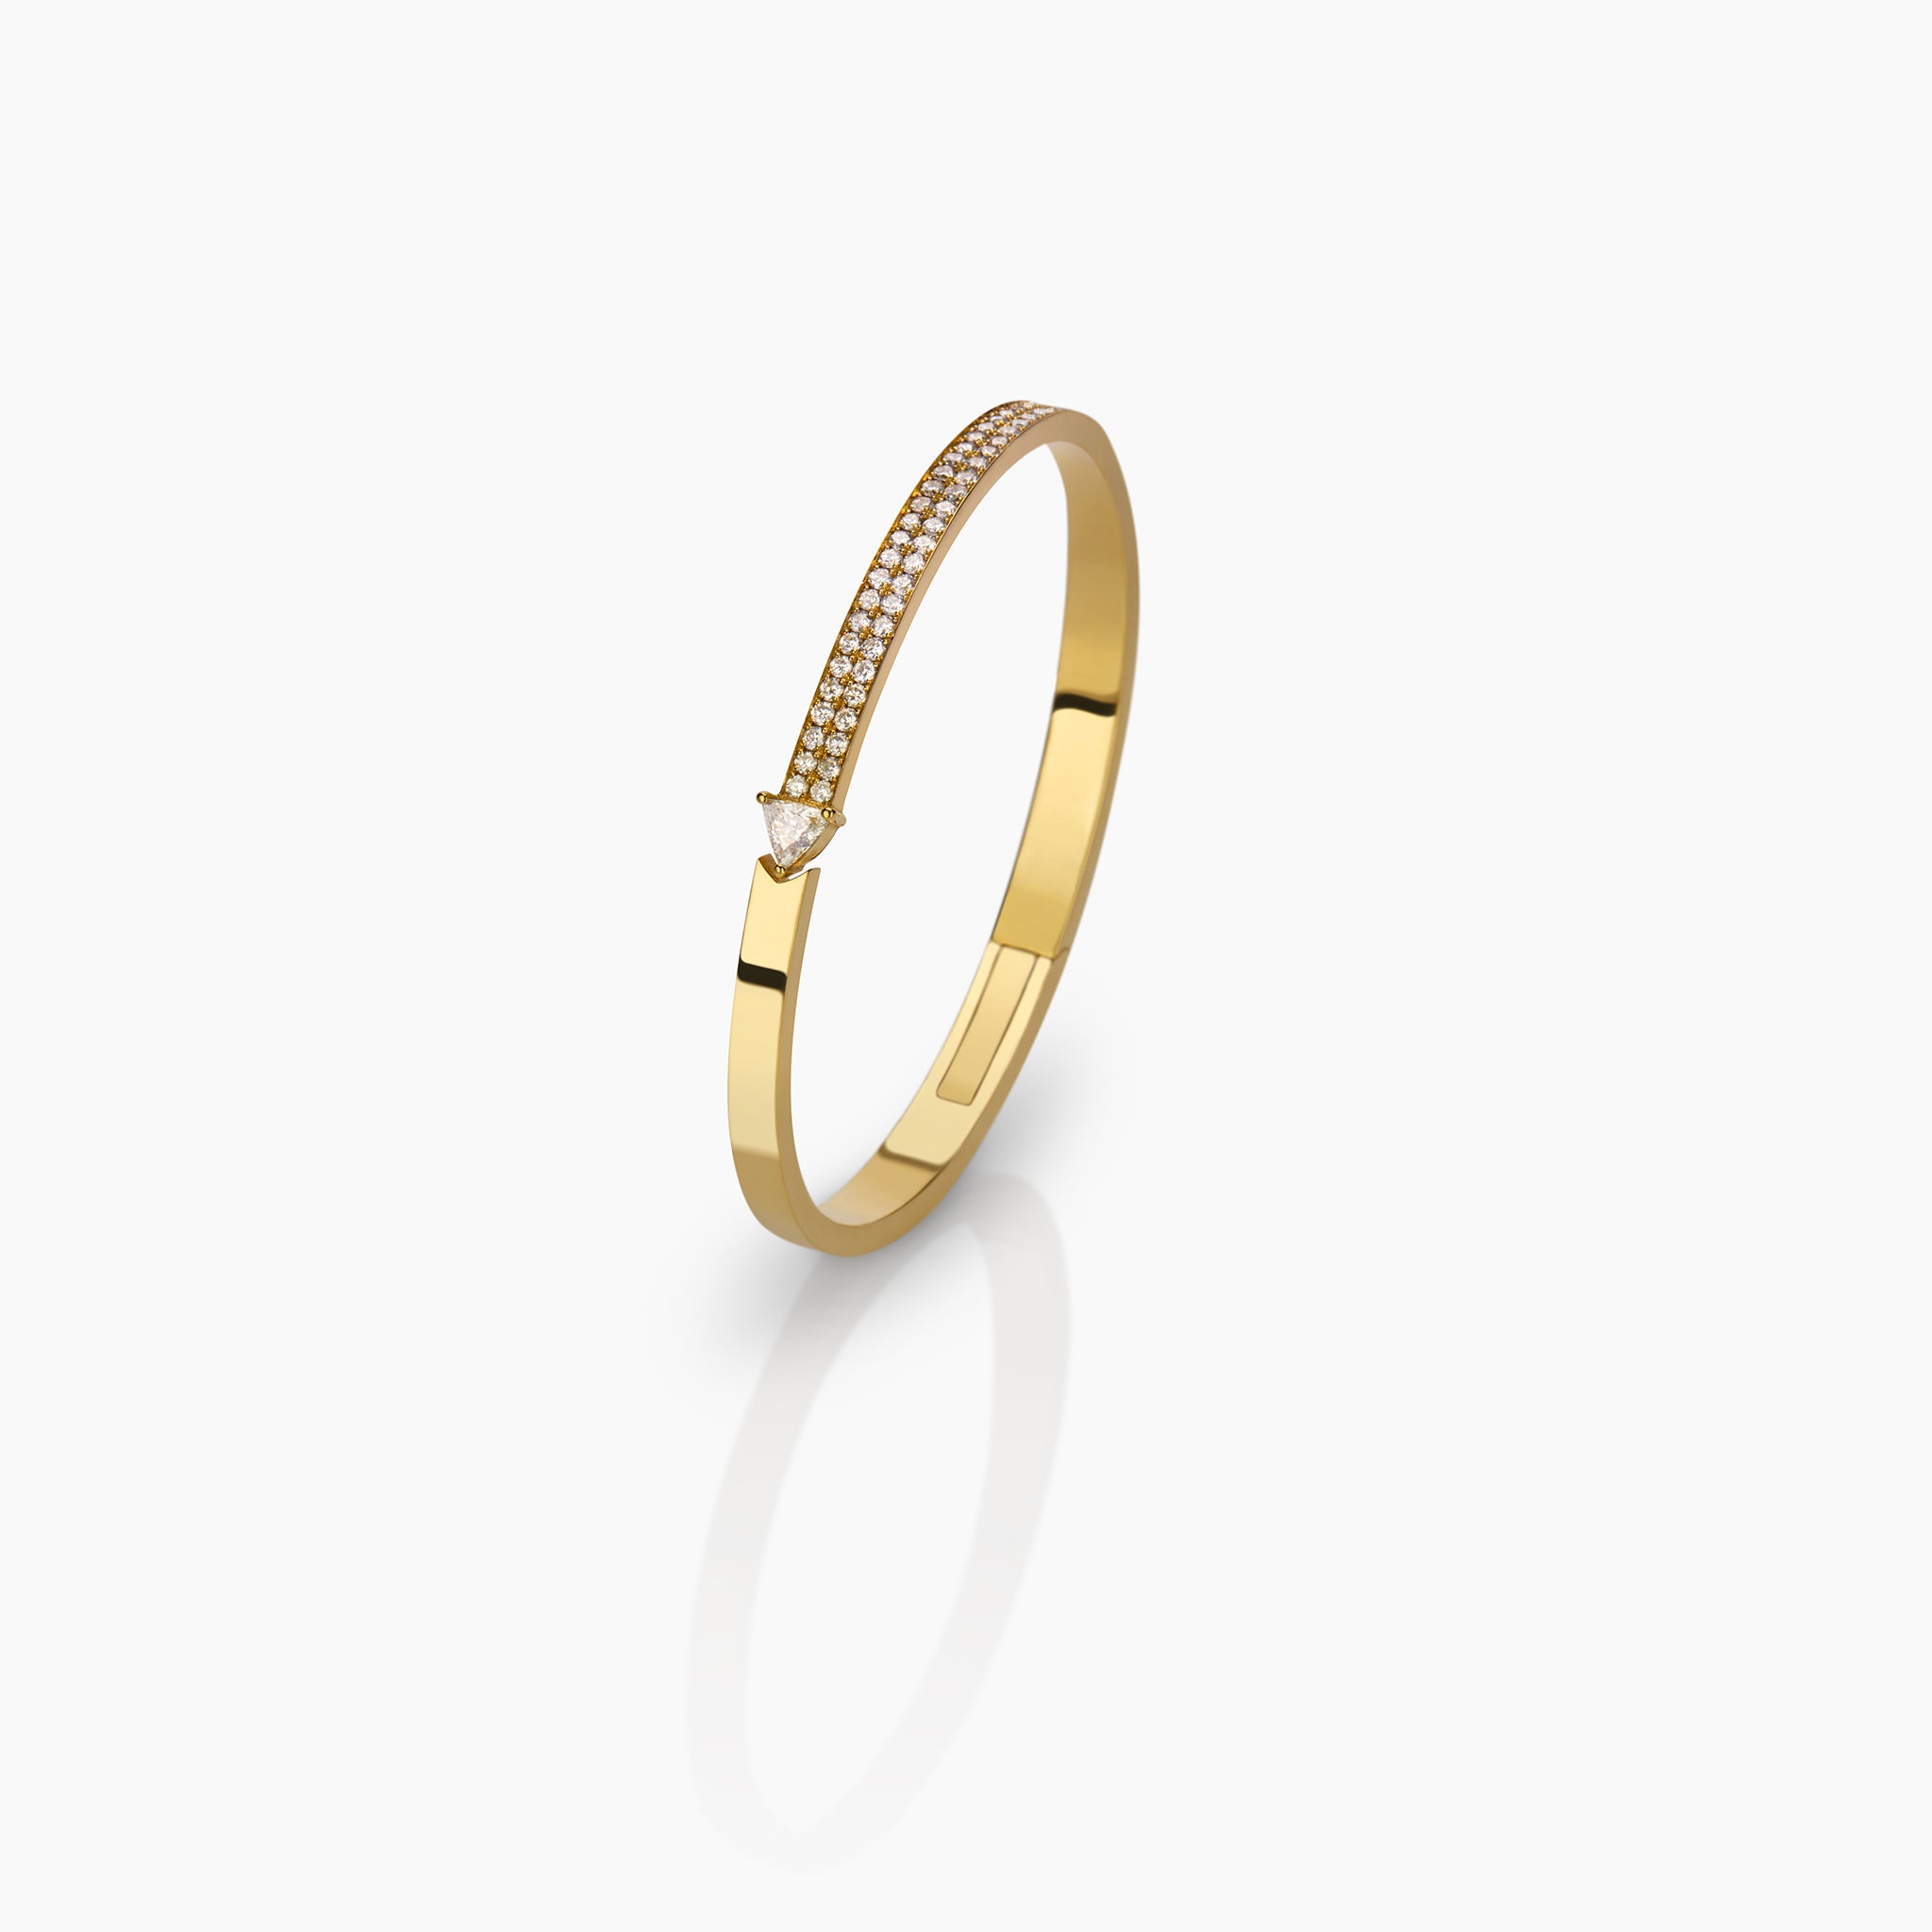 Yellow gold bangle with pave diamonds and a trillion displayed against an off white background